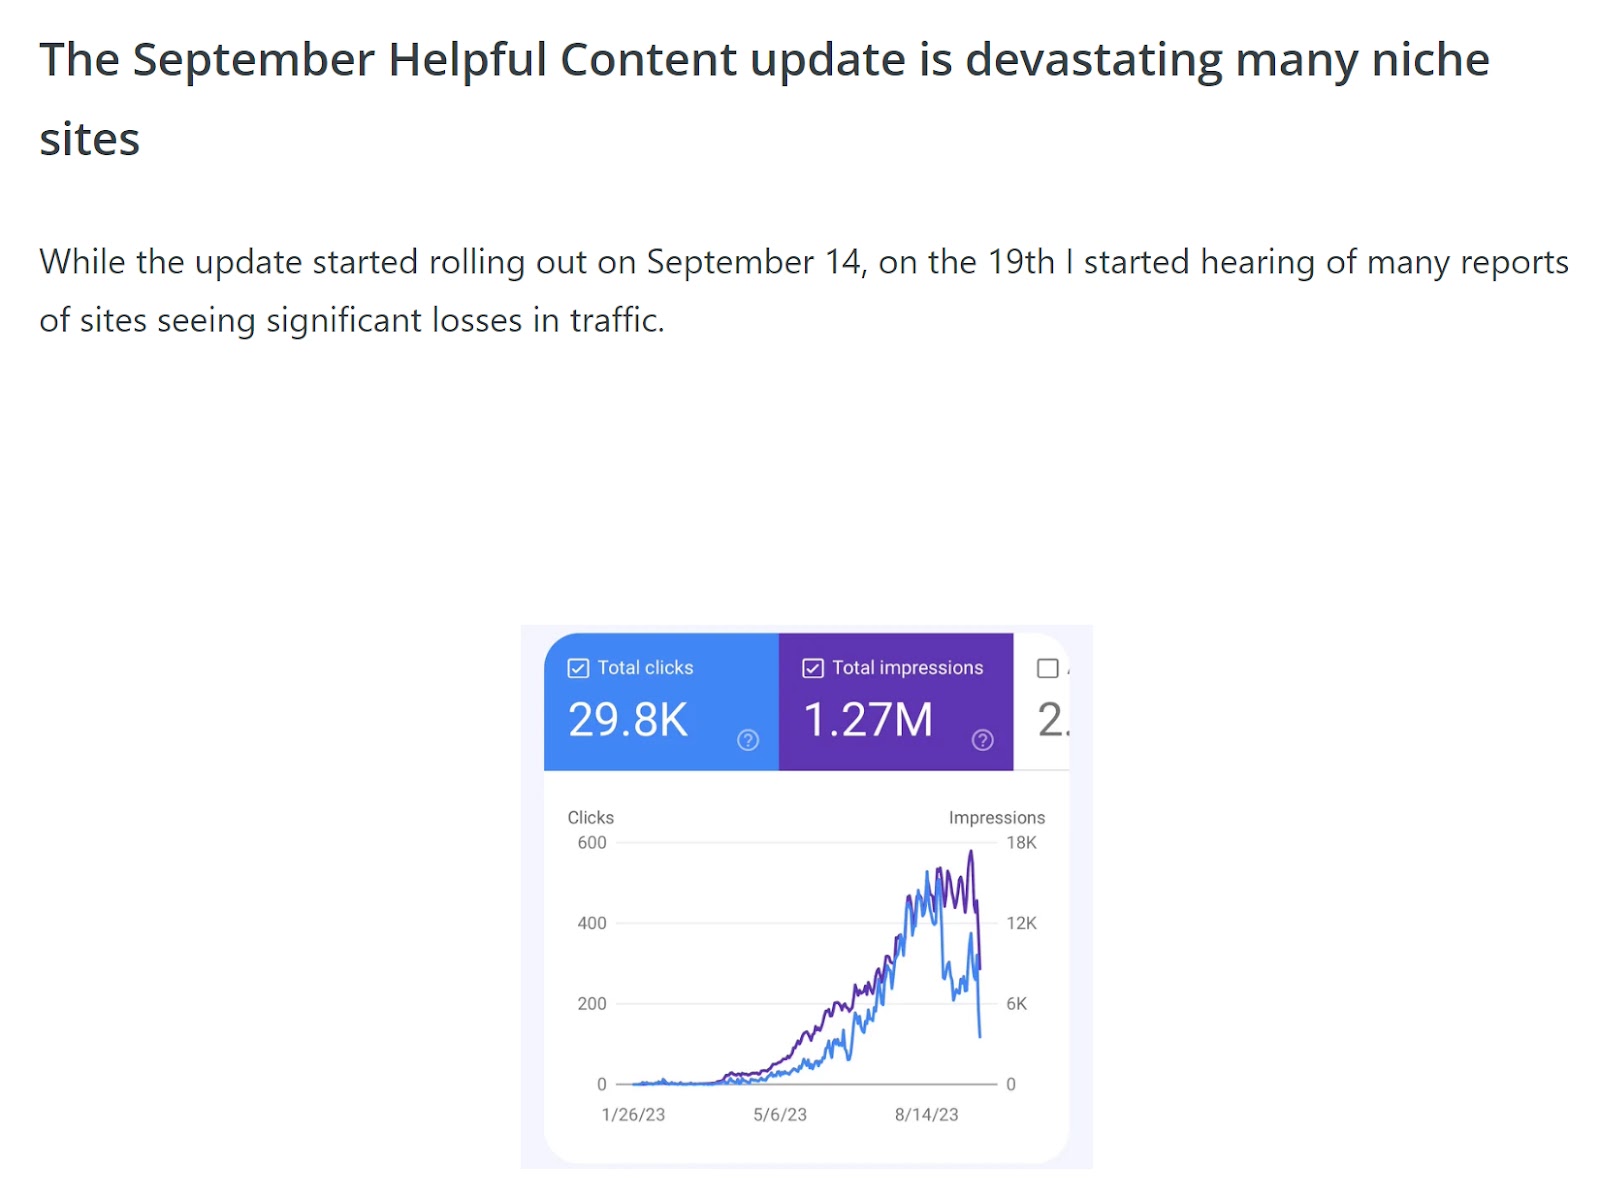 Search News You Can Use' section discussing a September Helpful Content update